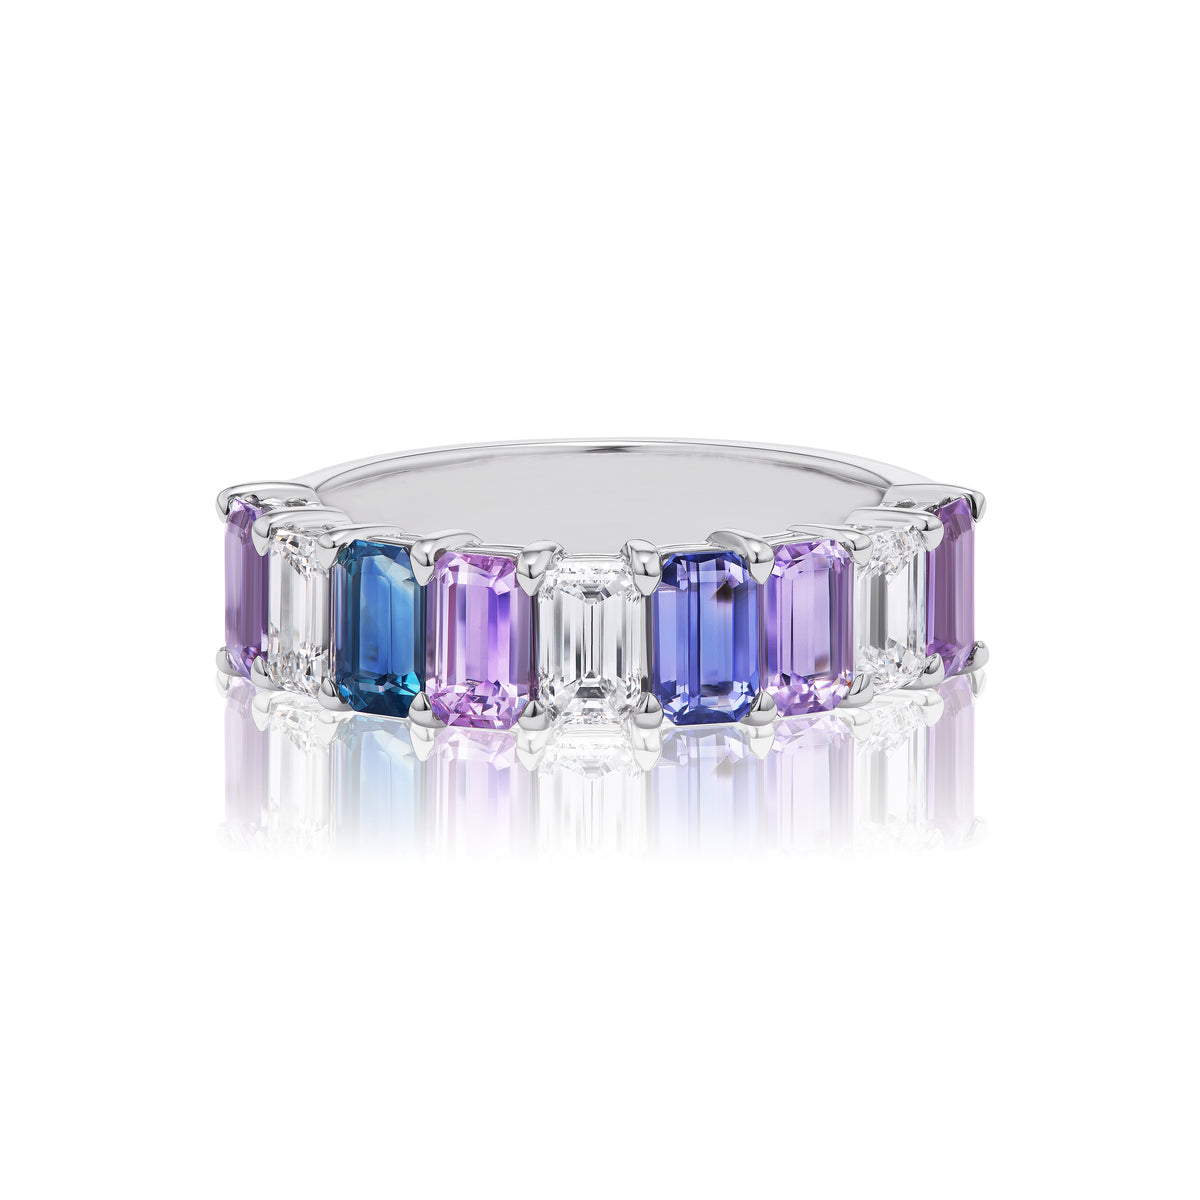 Emerald Cut Half Eternity Band in White Gold with Diamonds and Multicolored Sapphires